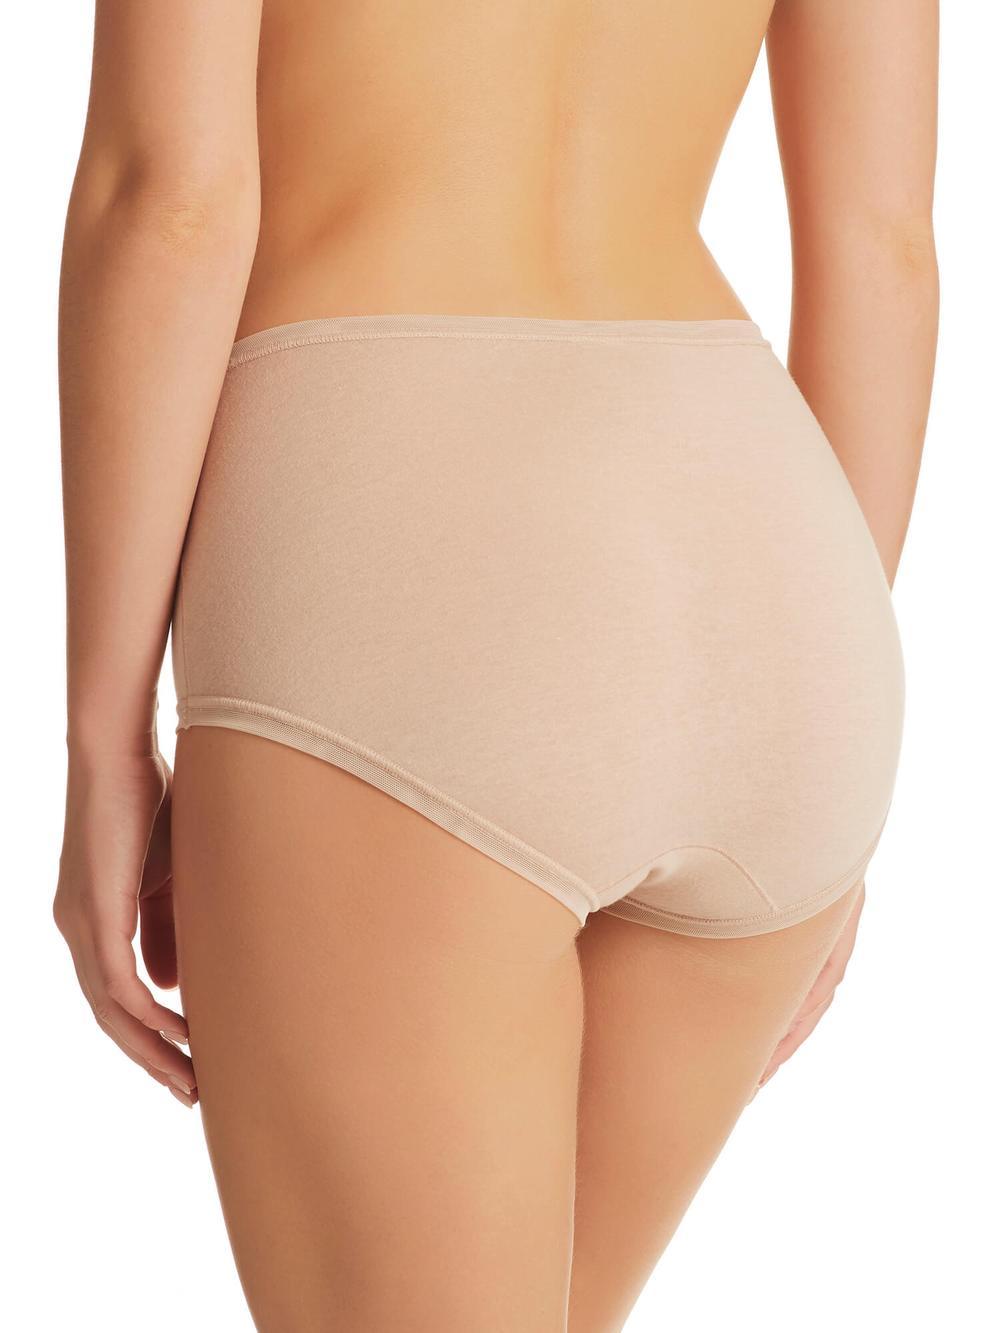 Kayser Pure Cotton Full Brief - Briefs  Available at Illusions Lingerie